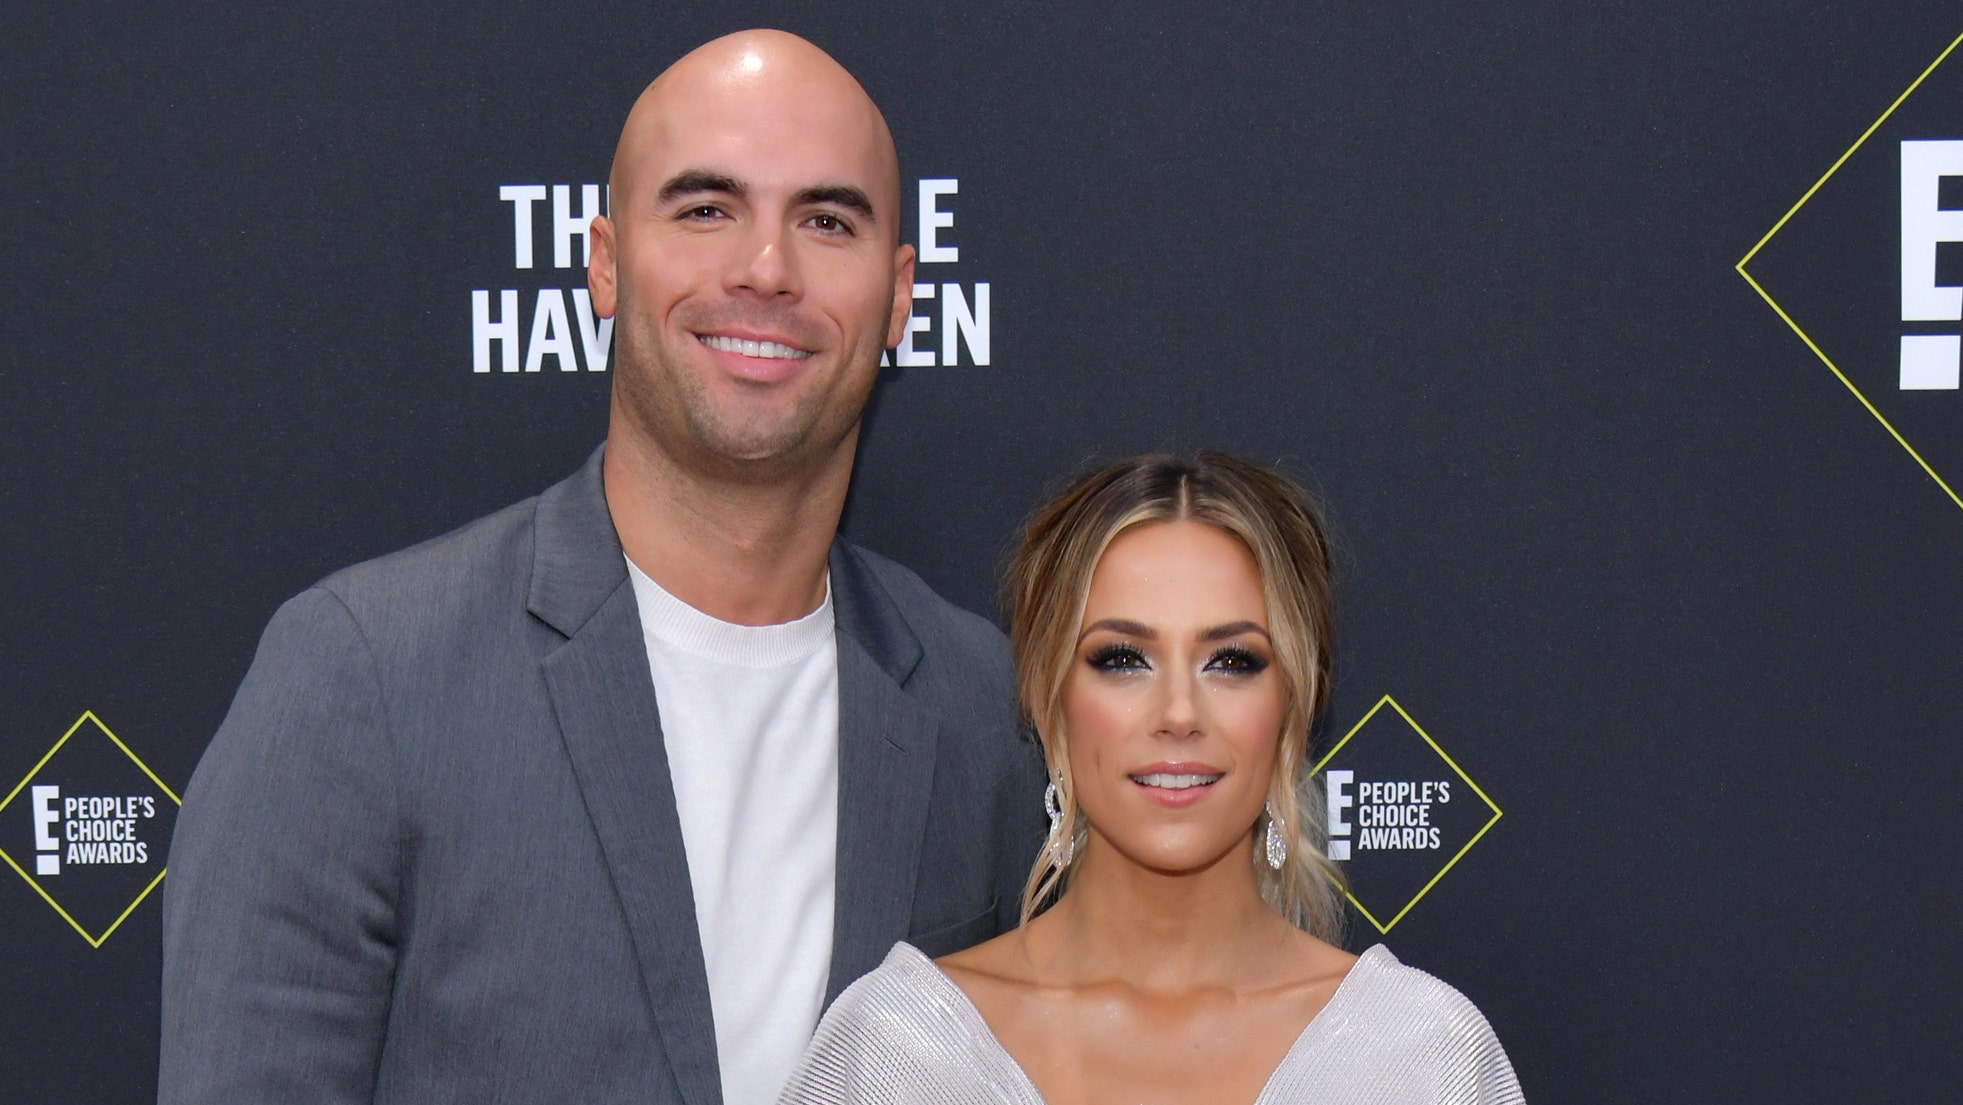 Jana Kramer recalls 'blow up' fight with husband Mike Caussin that made her cry